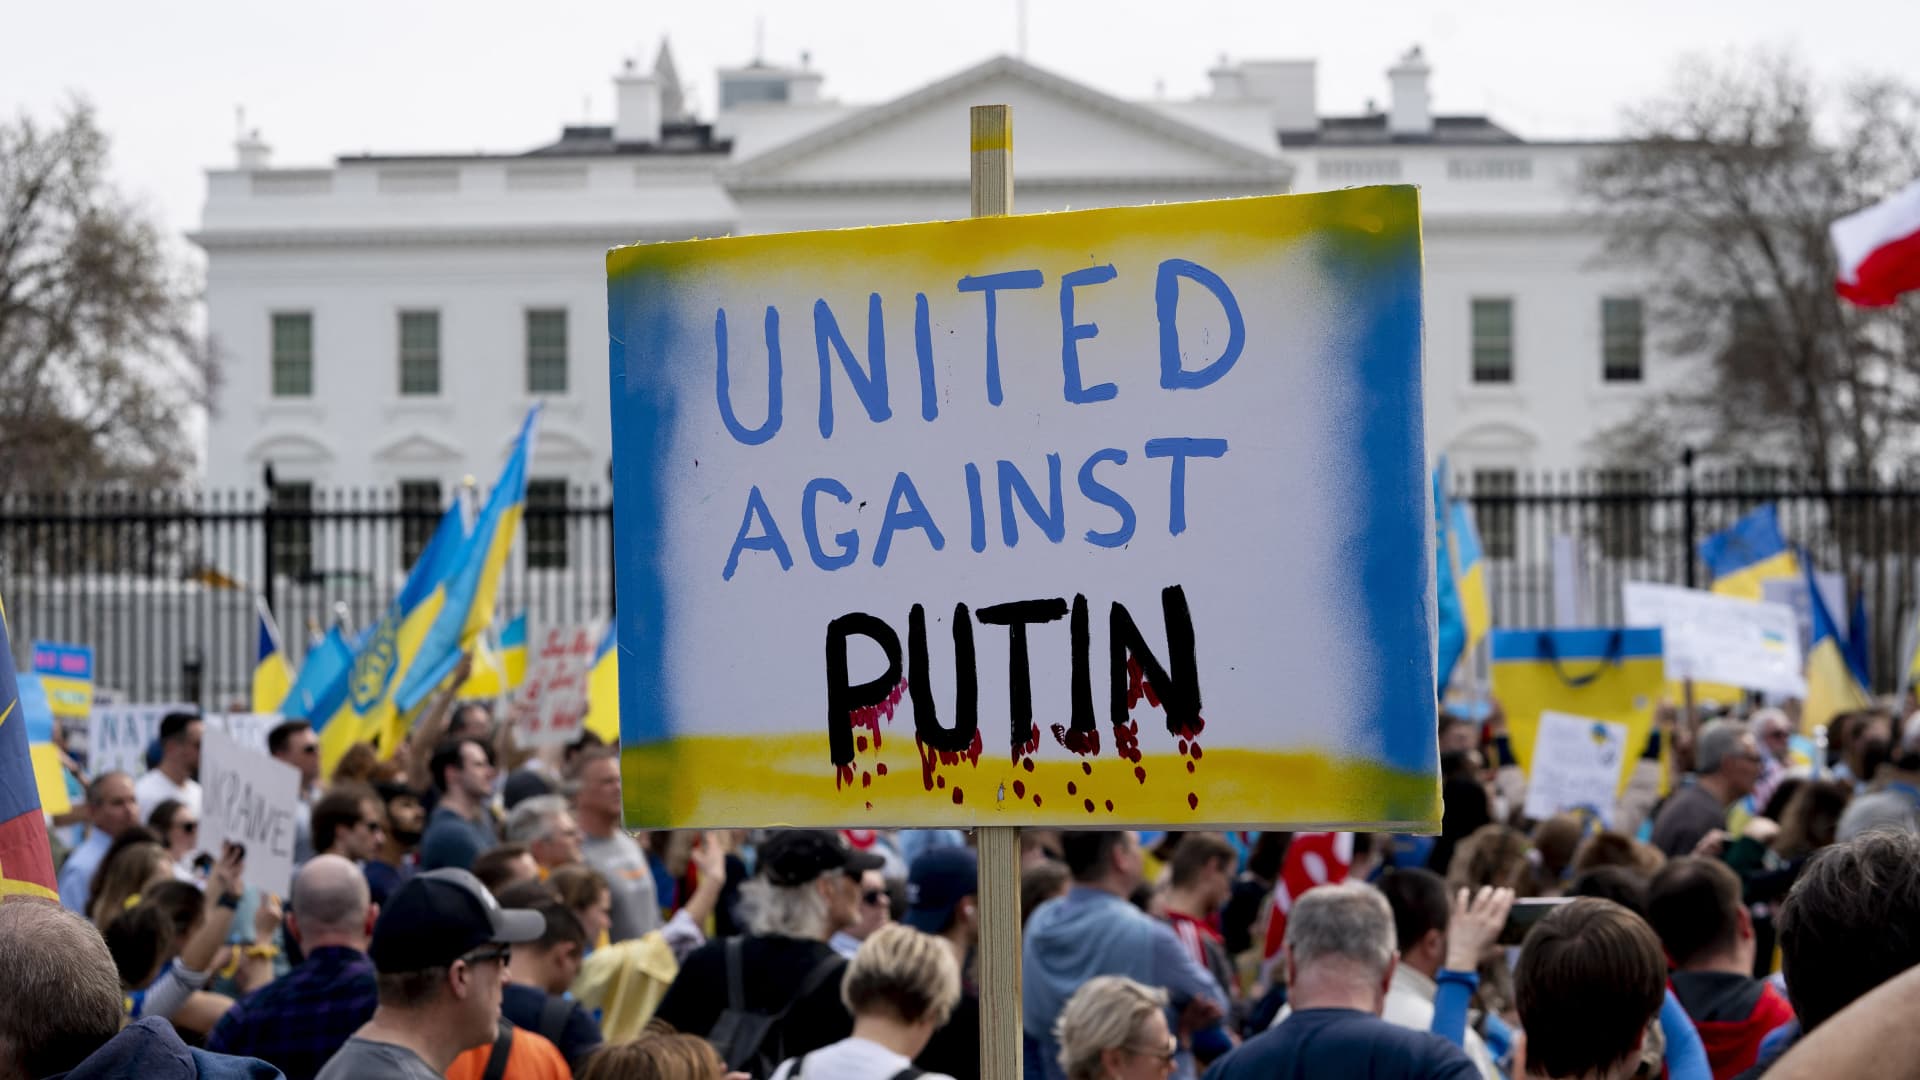 A demonstrator holds a United Against Putin sign outside the White House in Washington, DC, on March 6, 2022, during a rally in support of Ukraine.